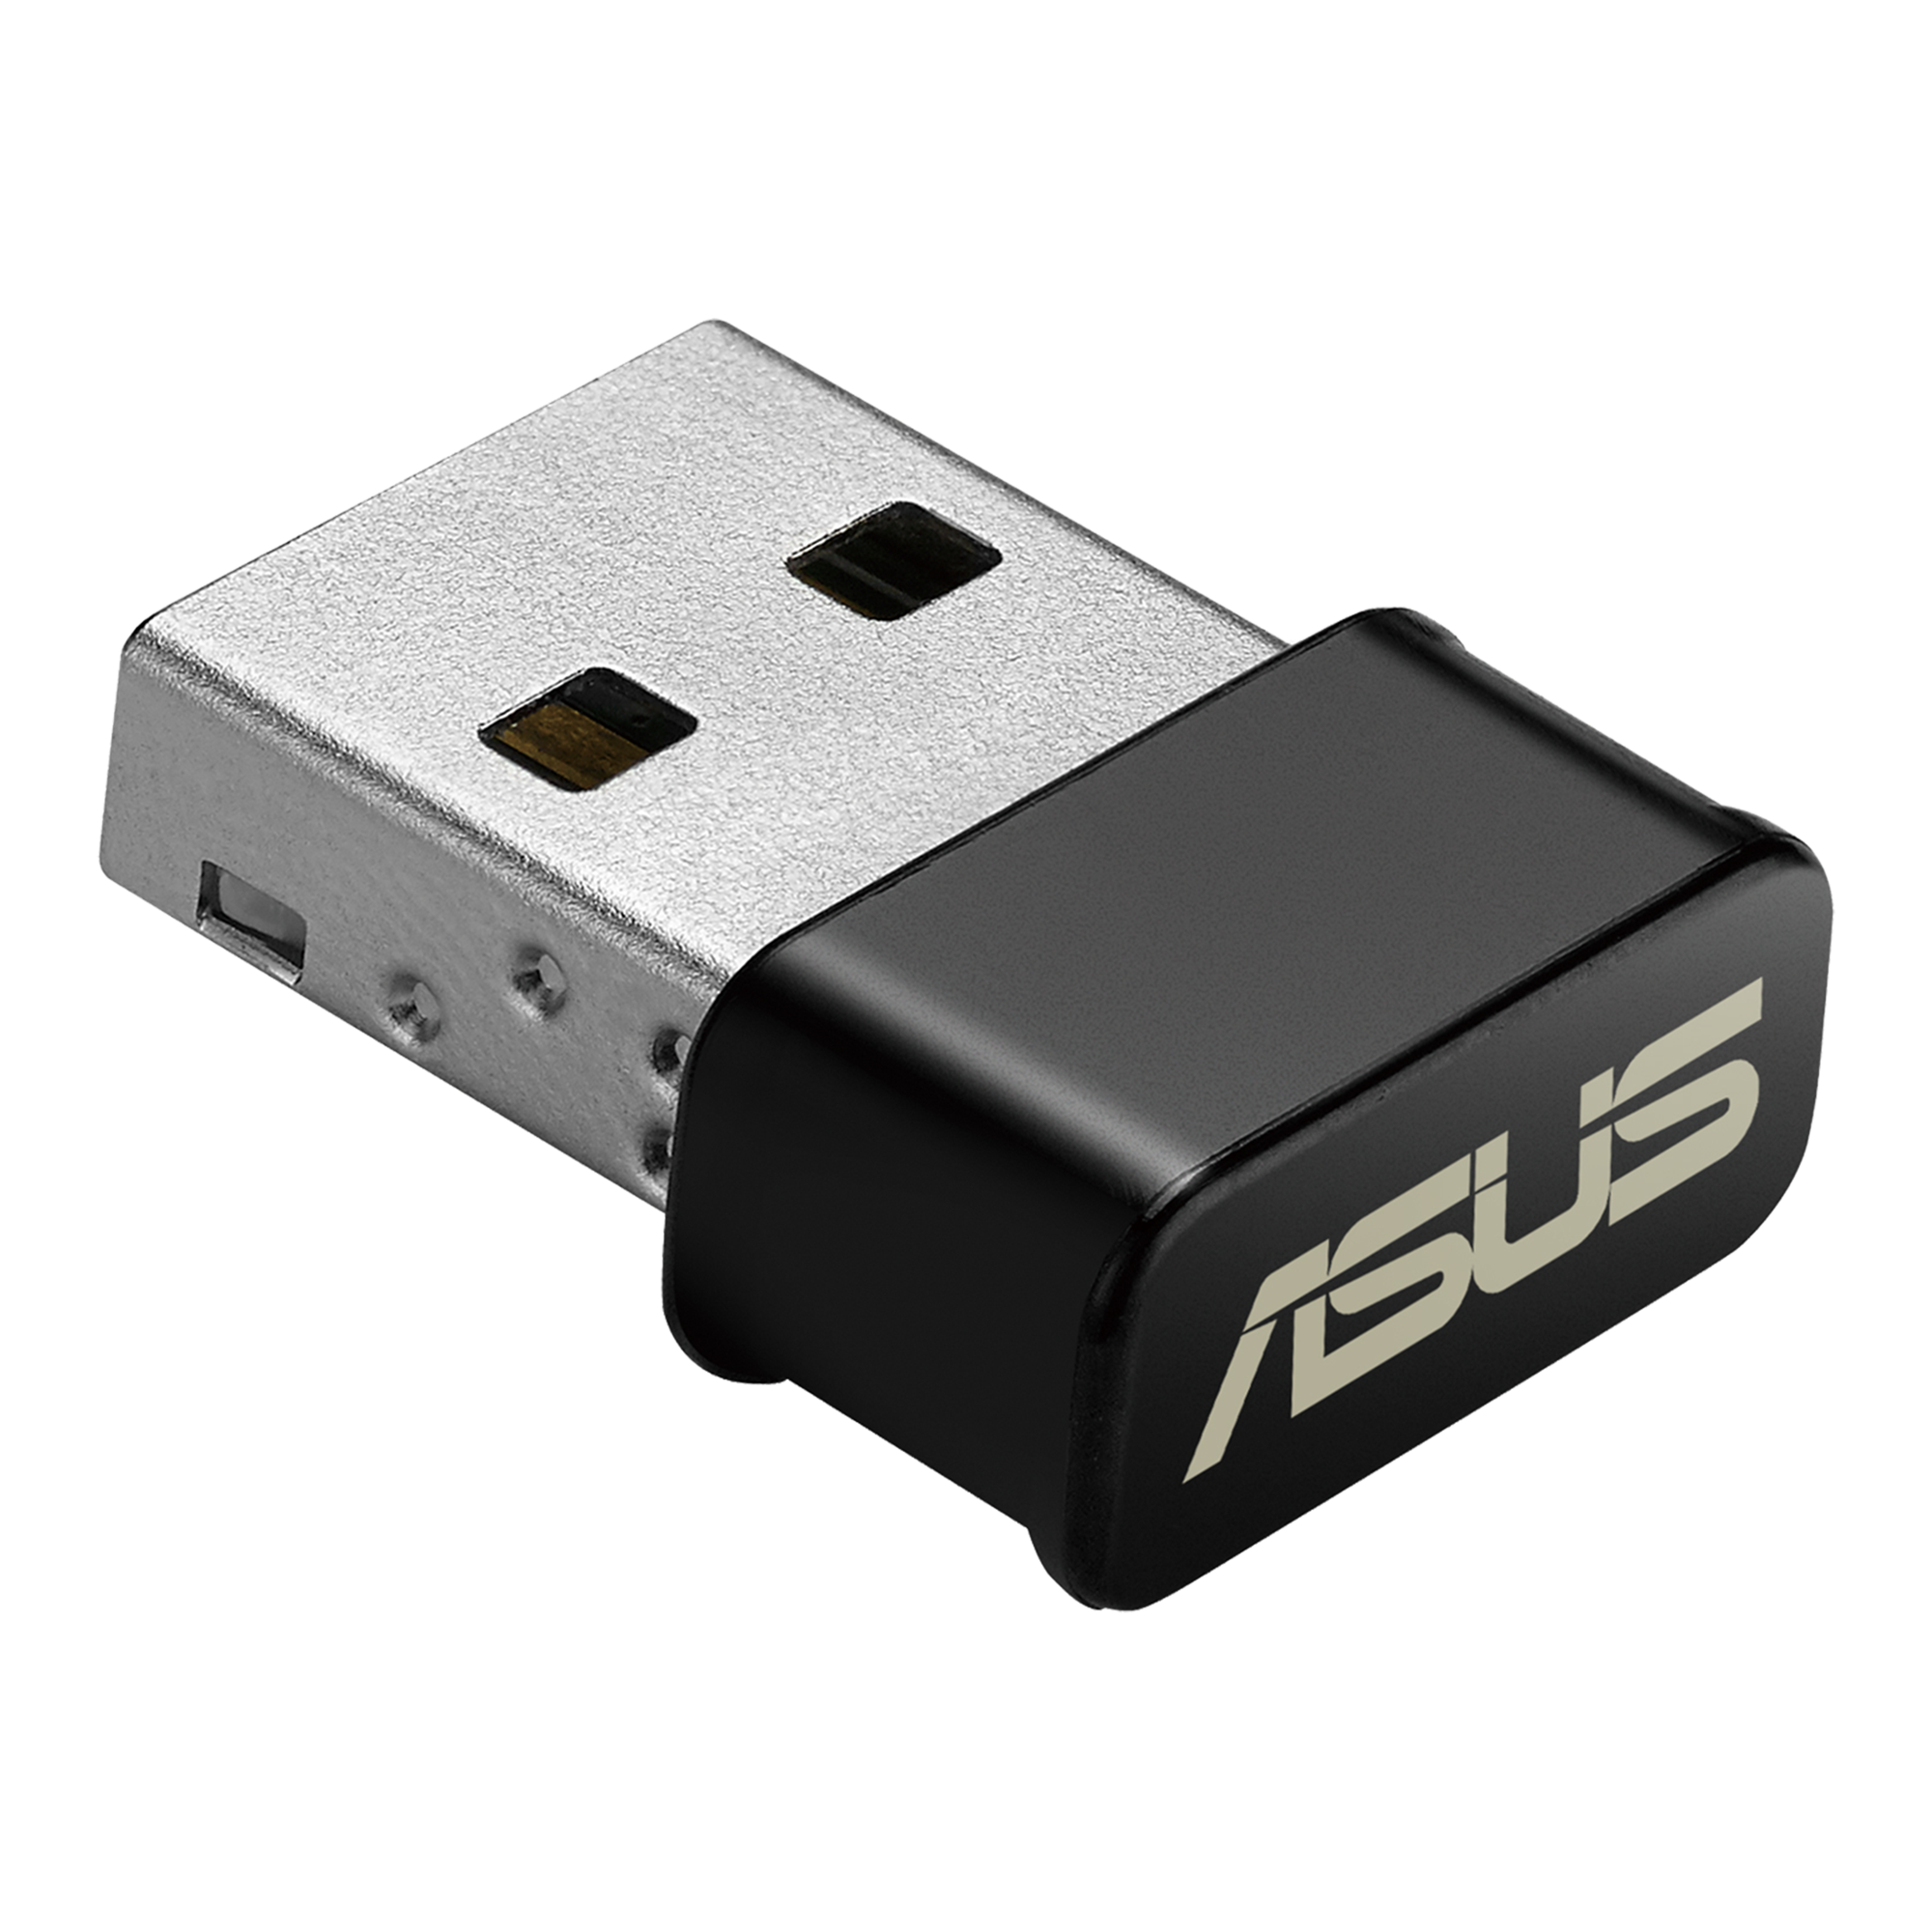 asus pc link aircast